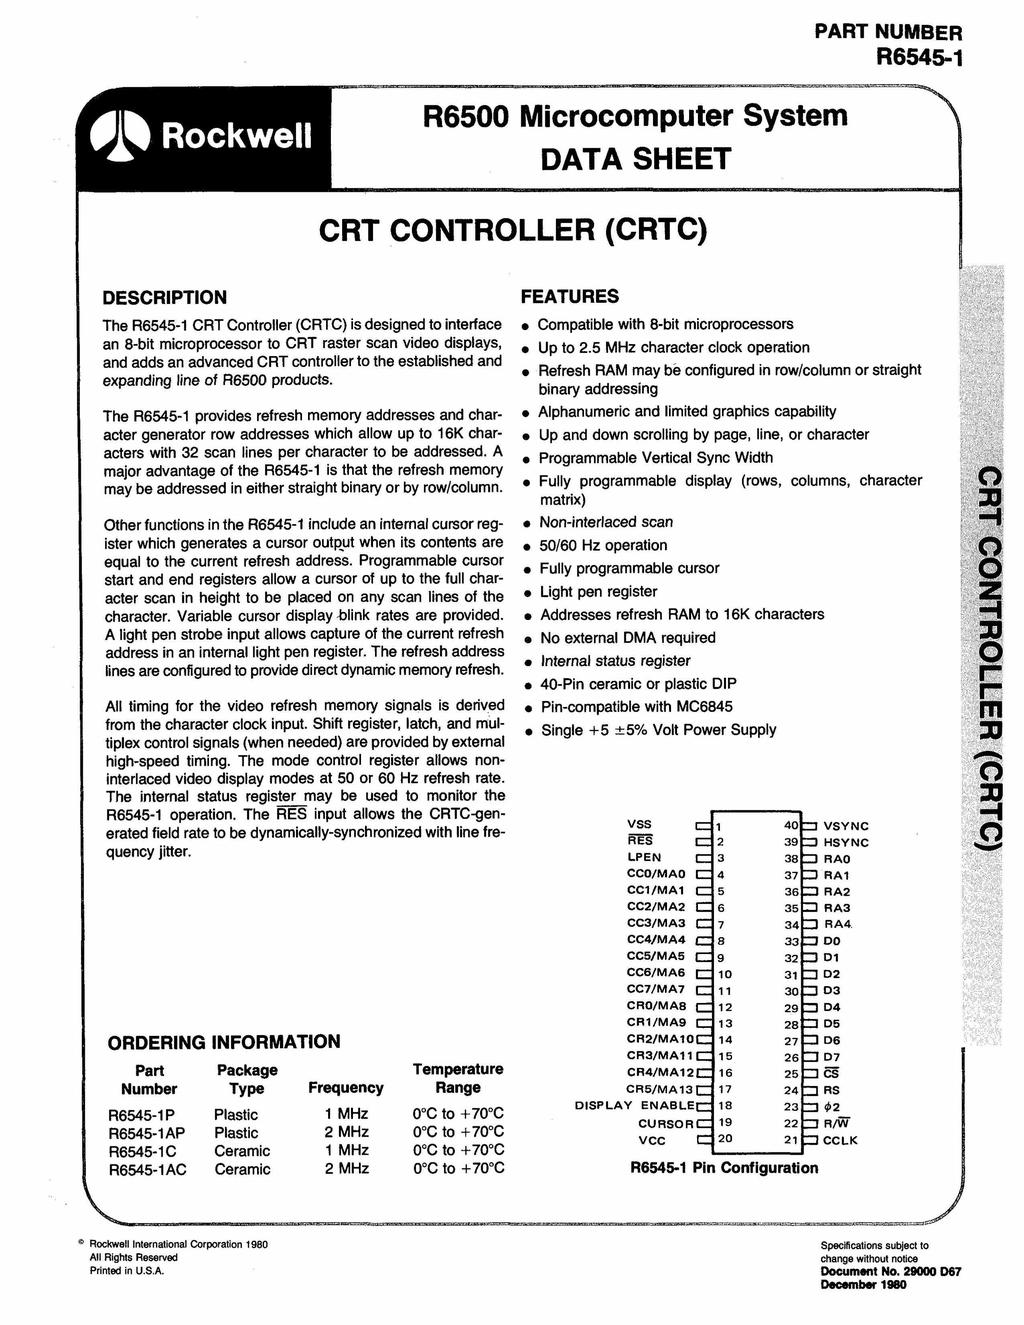 PART NUMBER R6545-1 A * Rockwell R6500 Microcomputer System DATA SHEET CRT CONTROLLER (CRTC) DESCRIPTION The R6545-1 CRT Controller (CRTC) is designed to interface an 8-bit microprocessor to CRT